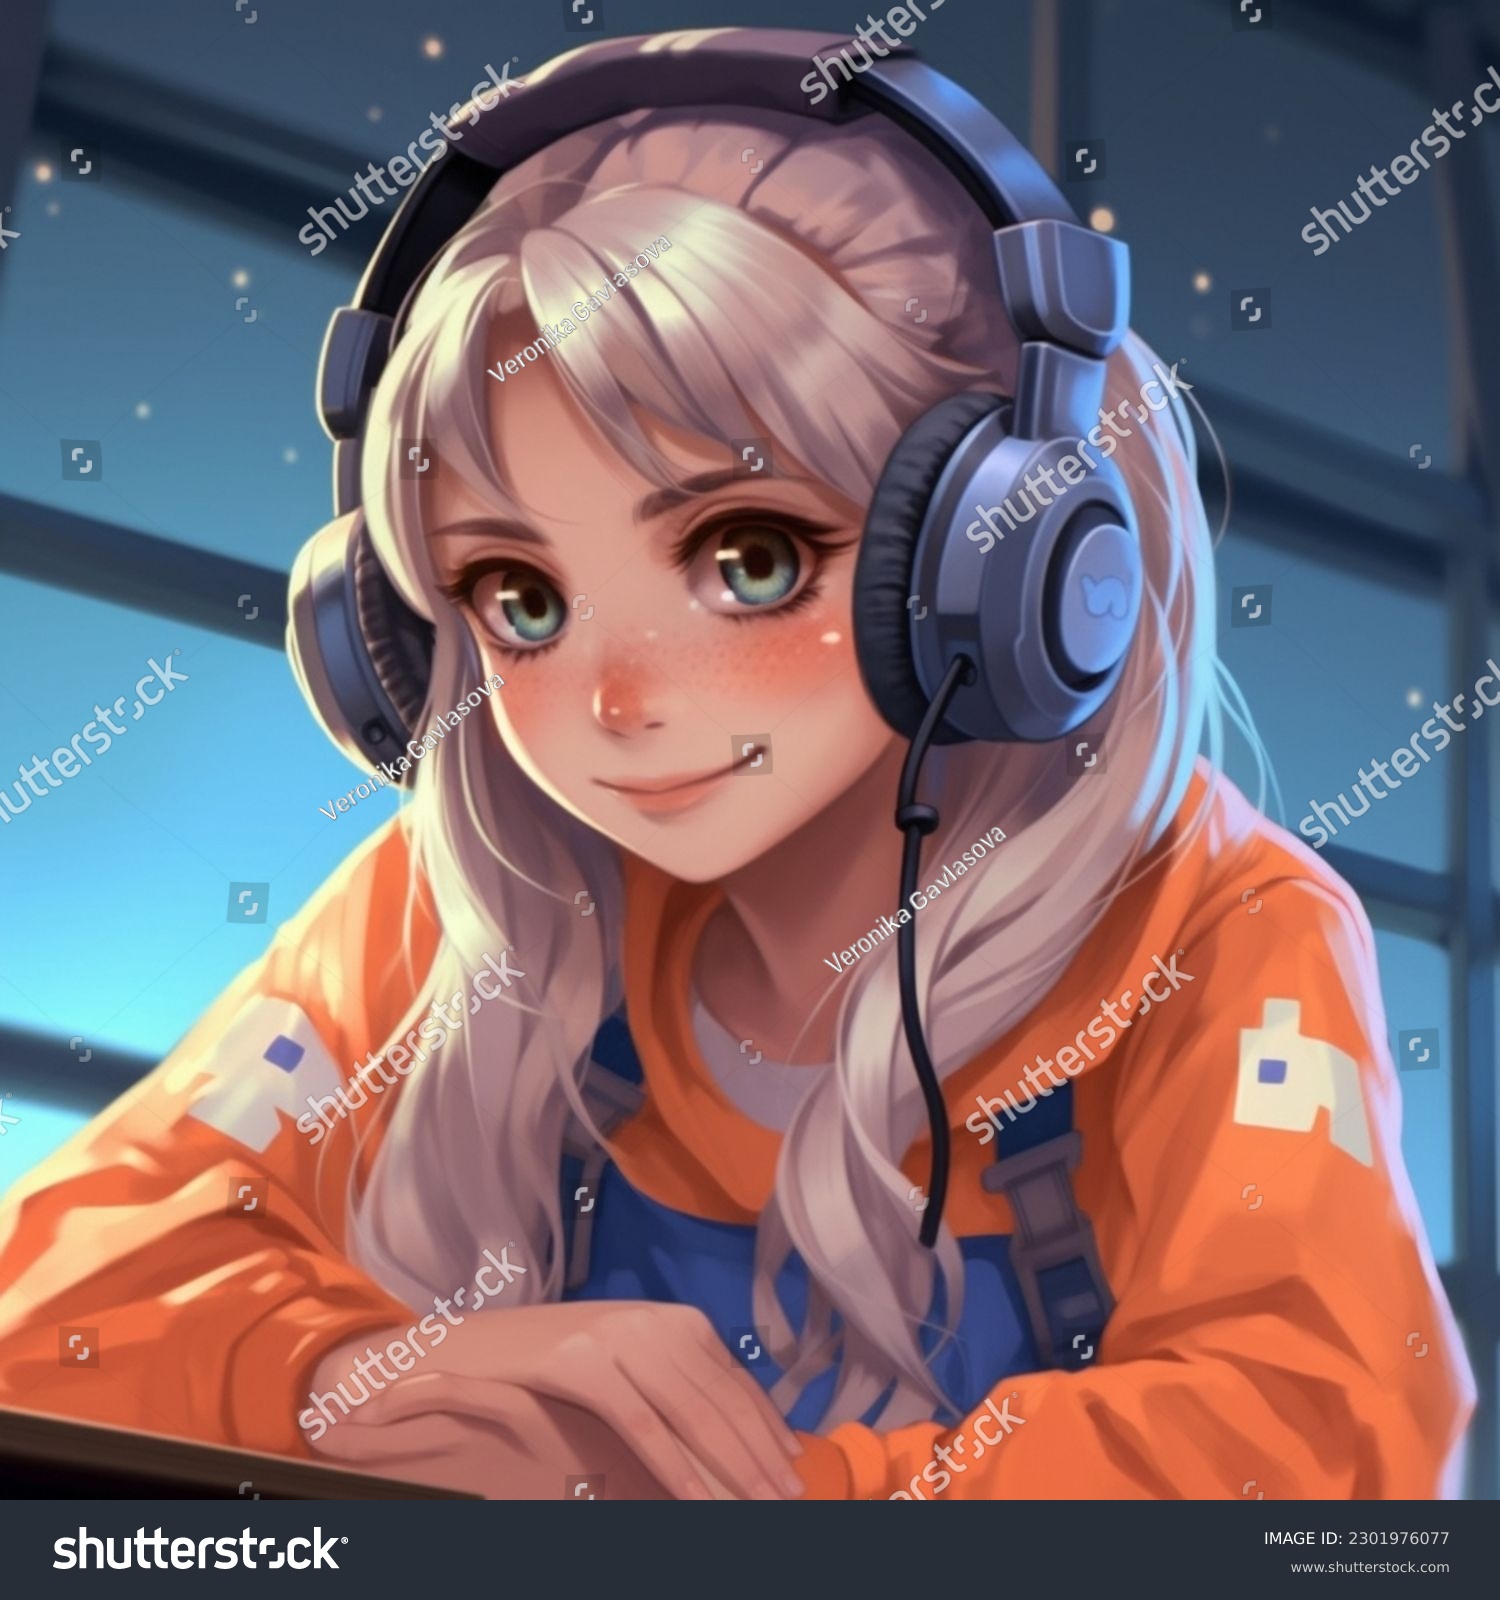 charles grant carey recommends Cute Anime Girl Headphones